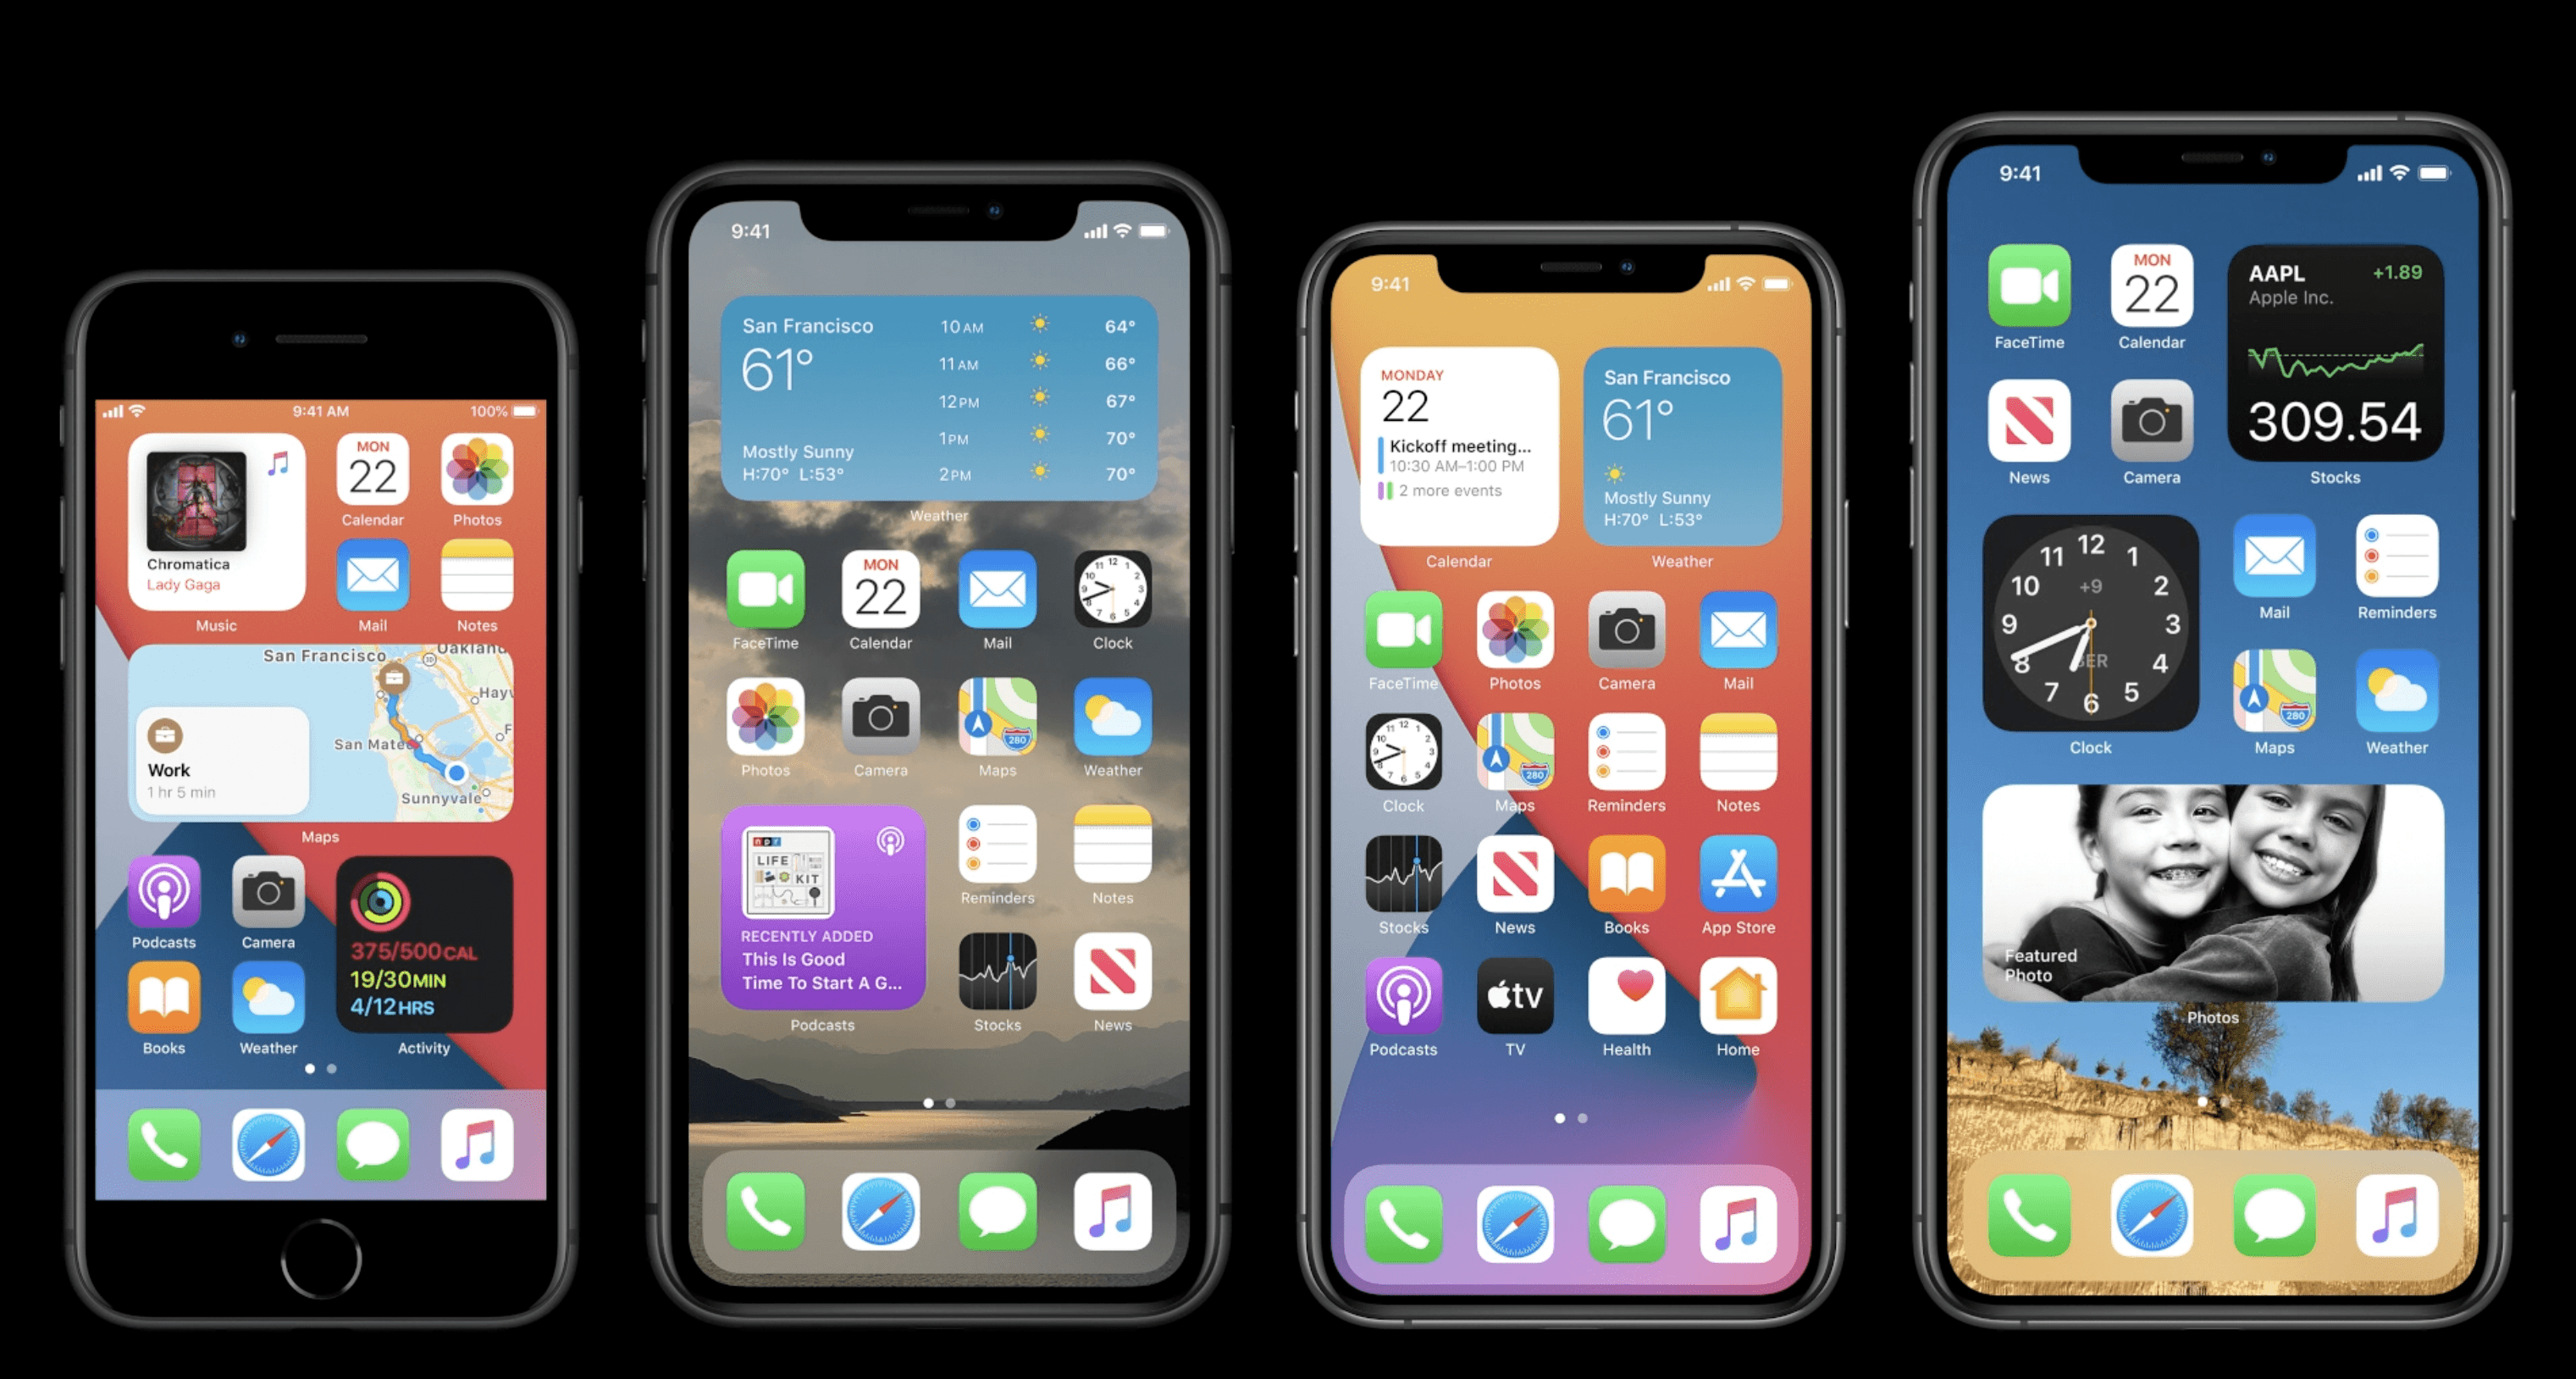 What Do You Think About Android Phones Copying The Iphone Notch